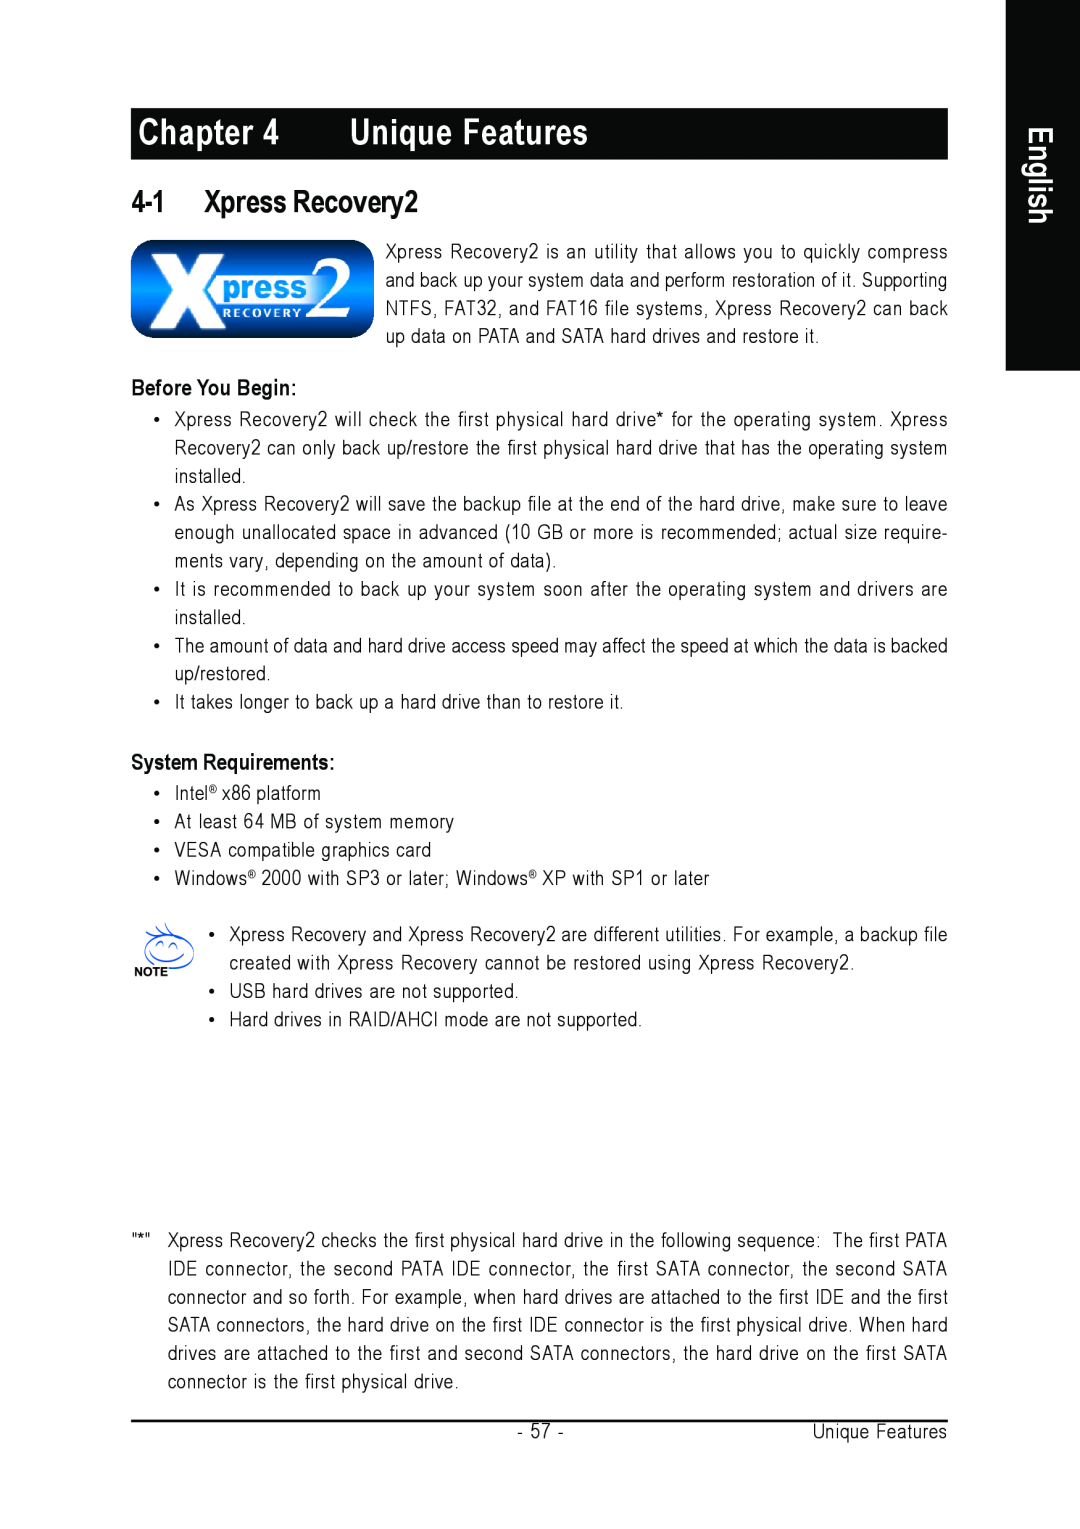 Gigabyte GA-M52S-S3P user manual Unique Features, Xpress Recovery2, Before You Begin, System Requirements, English 